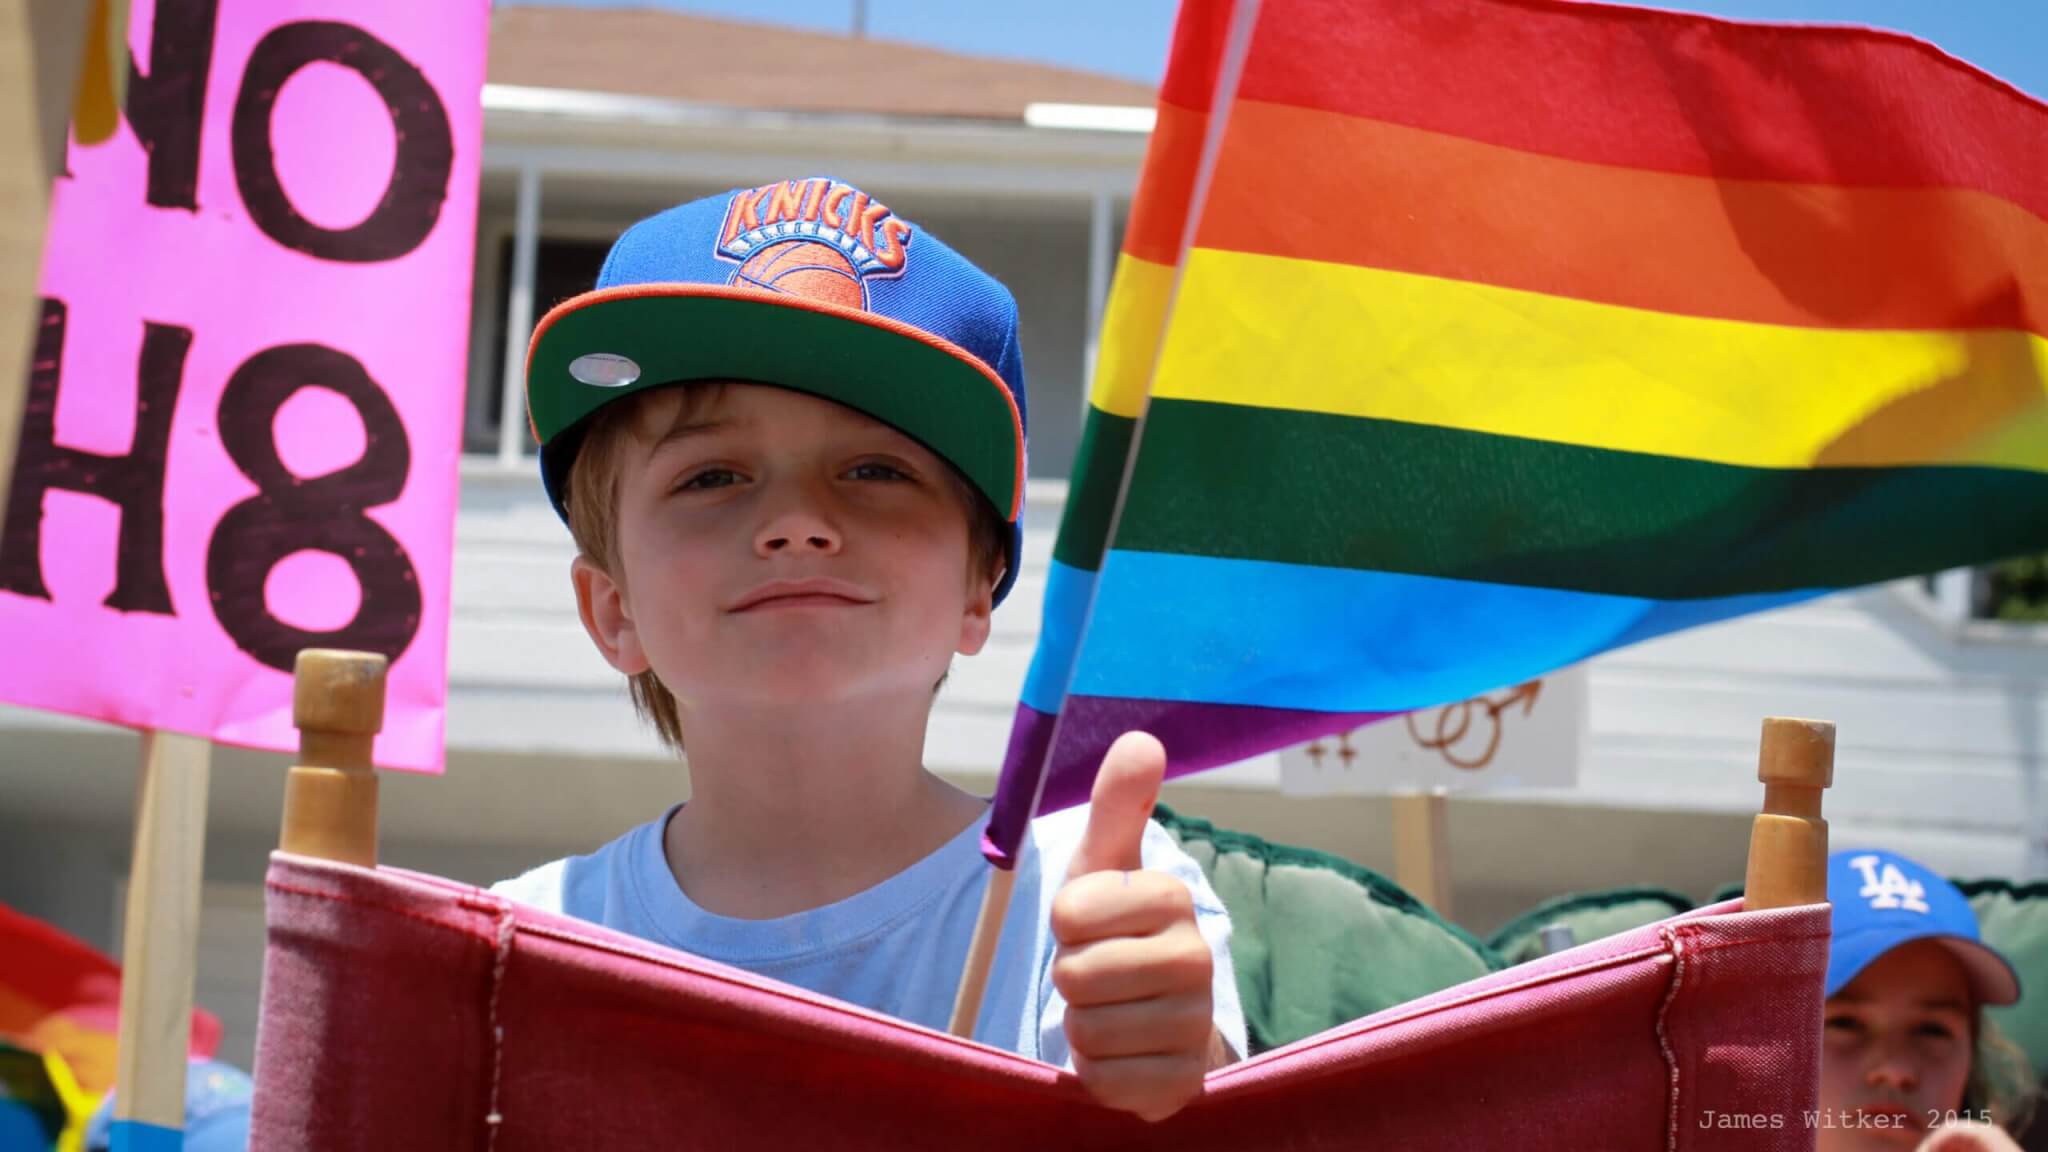 Boy with cap giving thumbs up and pride flag in the background